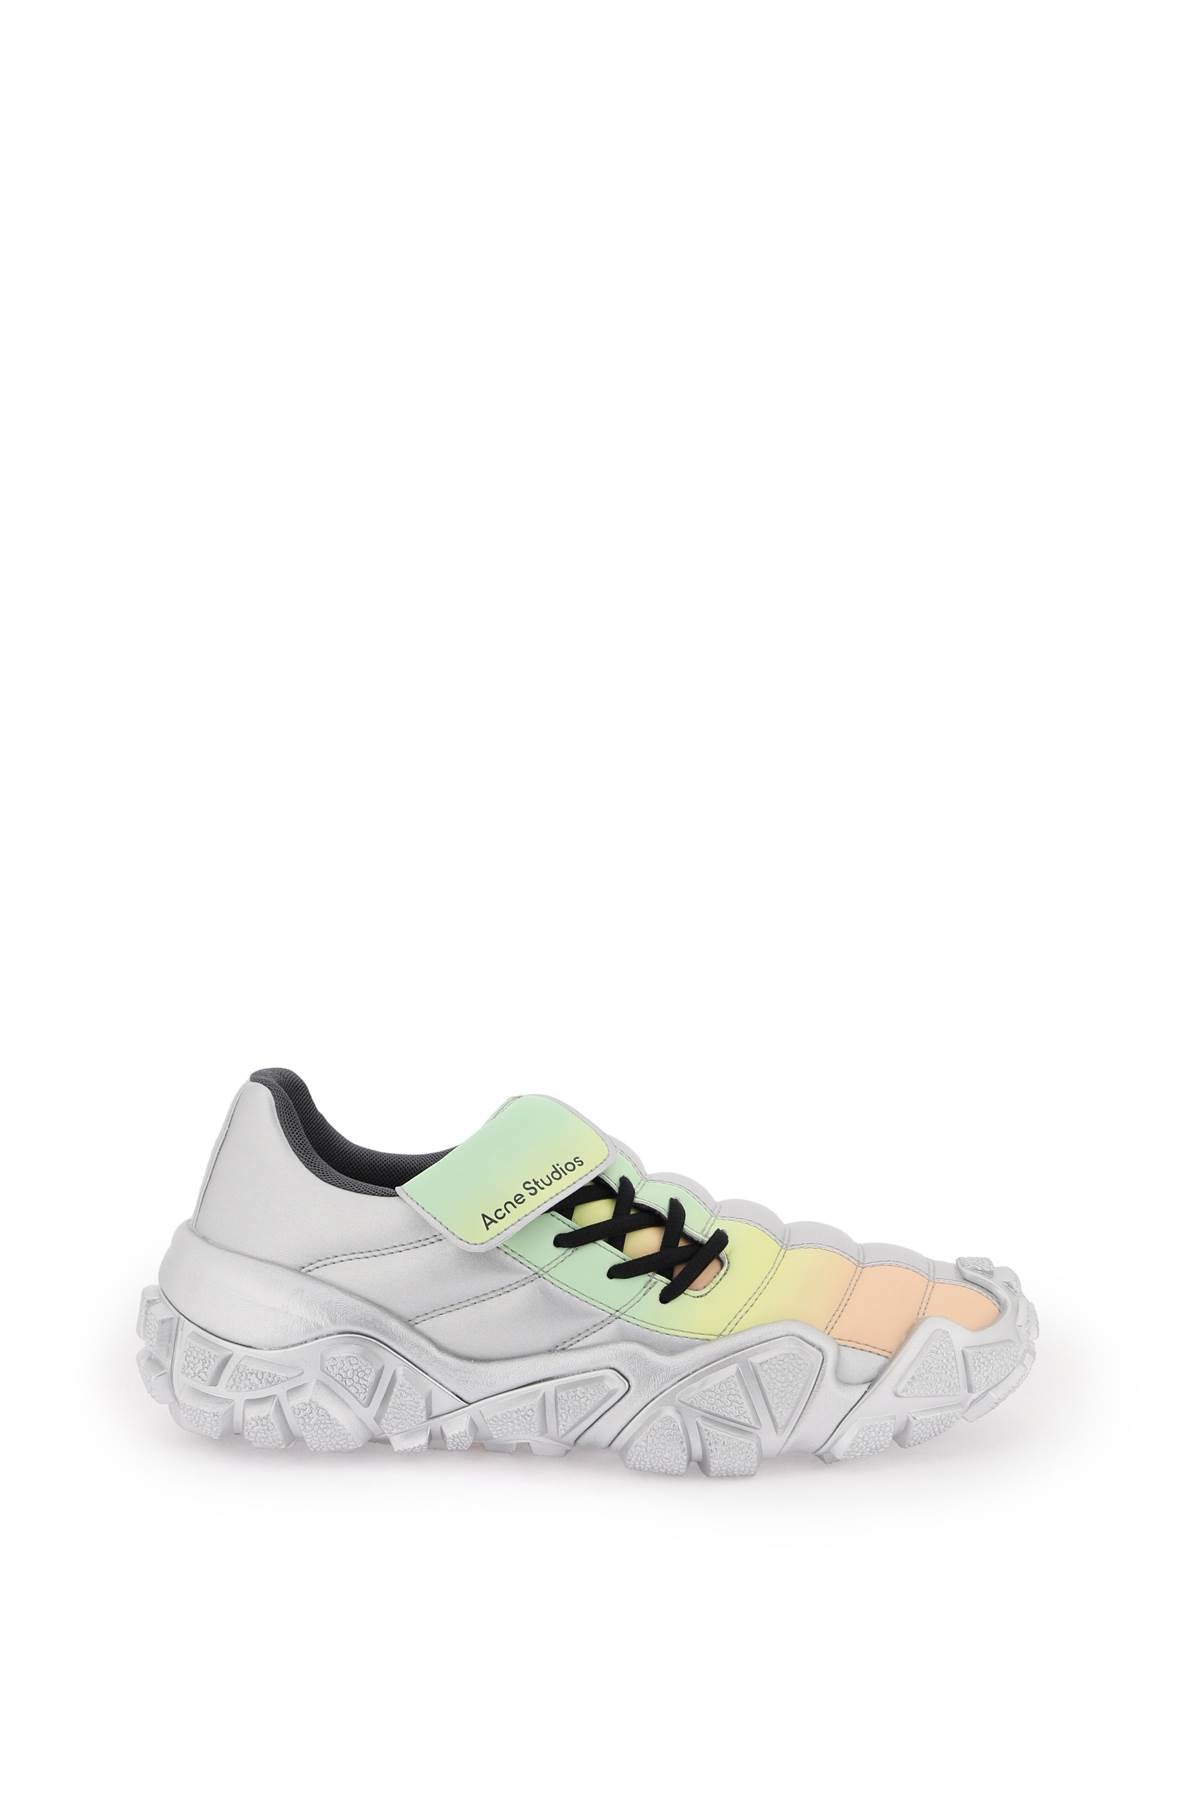 Acne Studios Multicolored Football-inspired Faux Leather Sneaker For Men